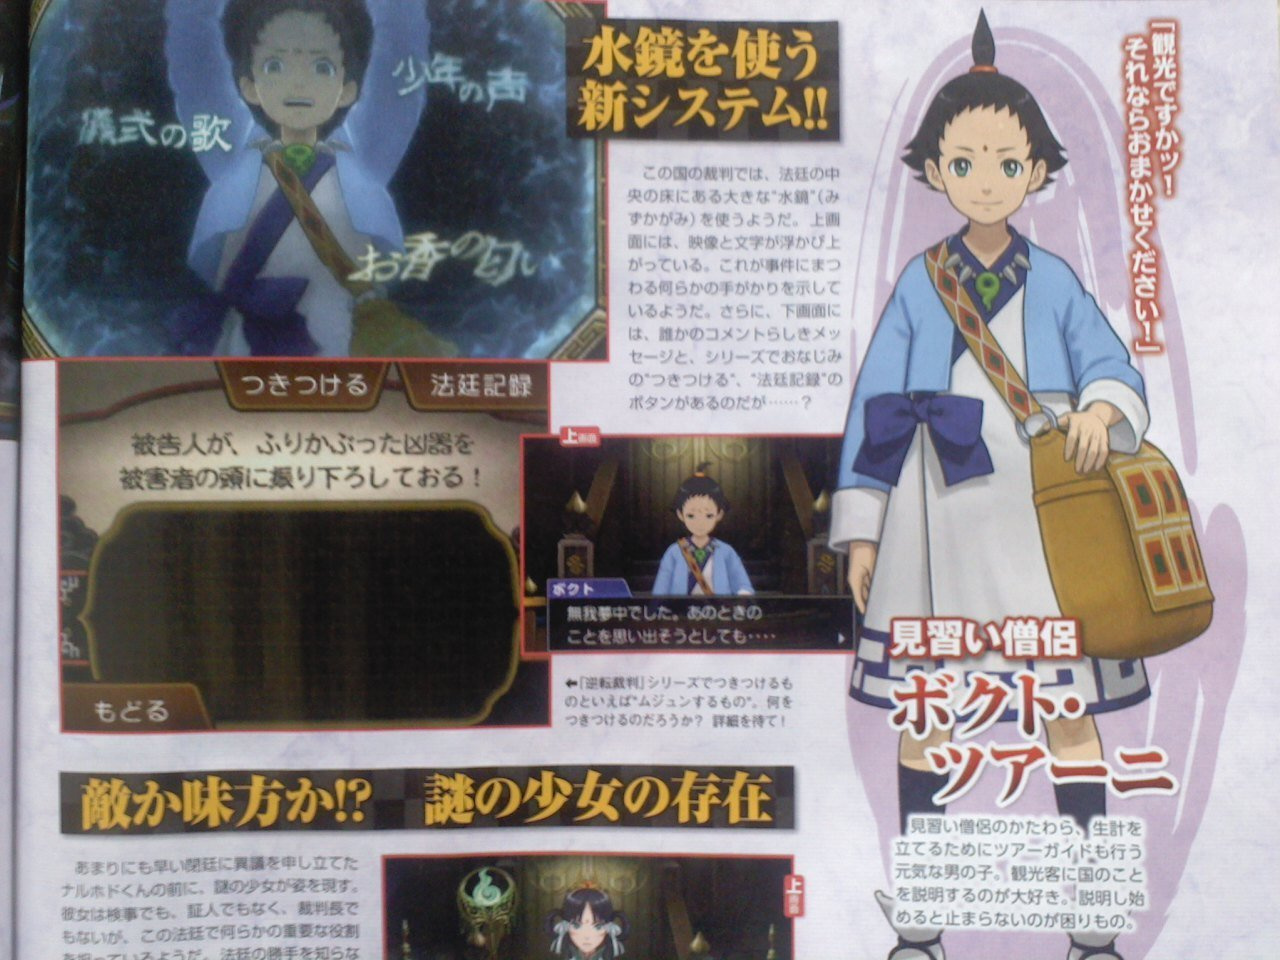 Ace Attorney 6 Definitely Heading To The West With Courtroom Revolution As A Theme Nintendo Life